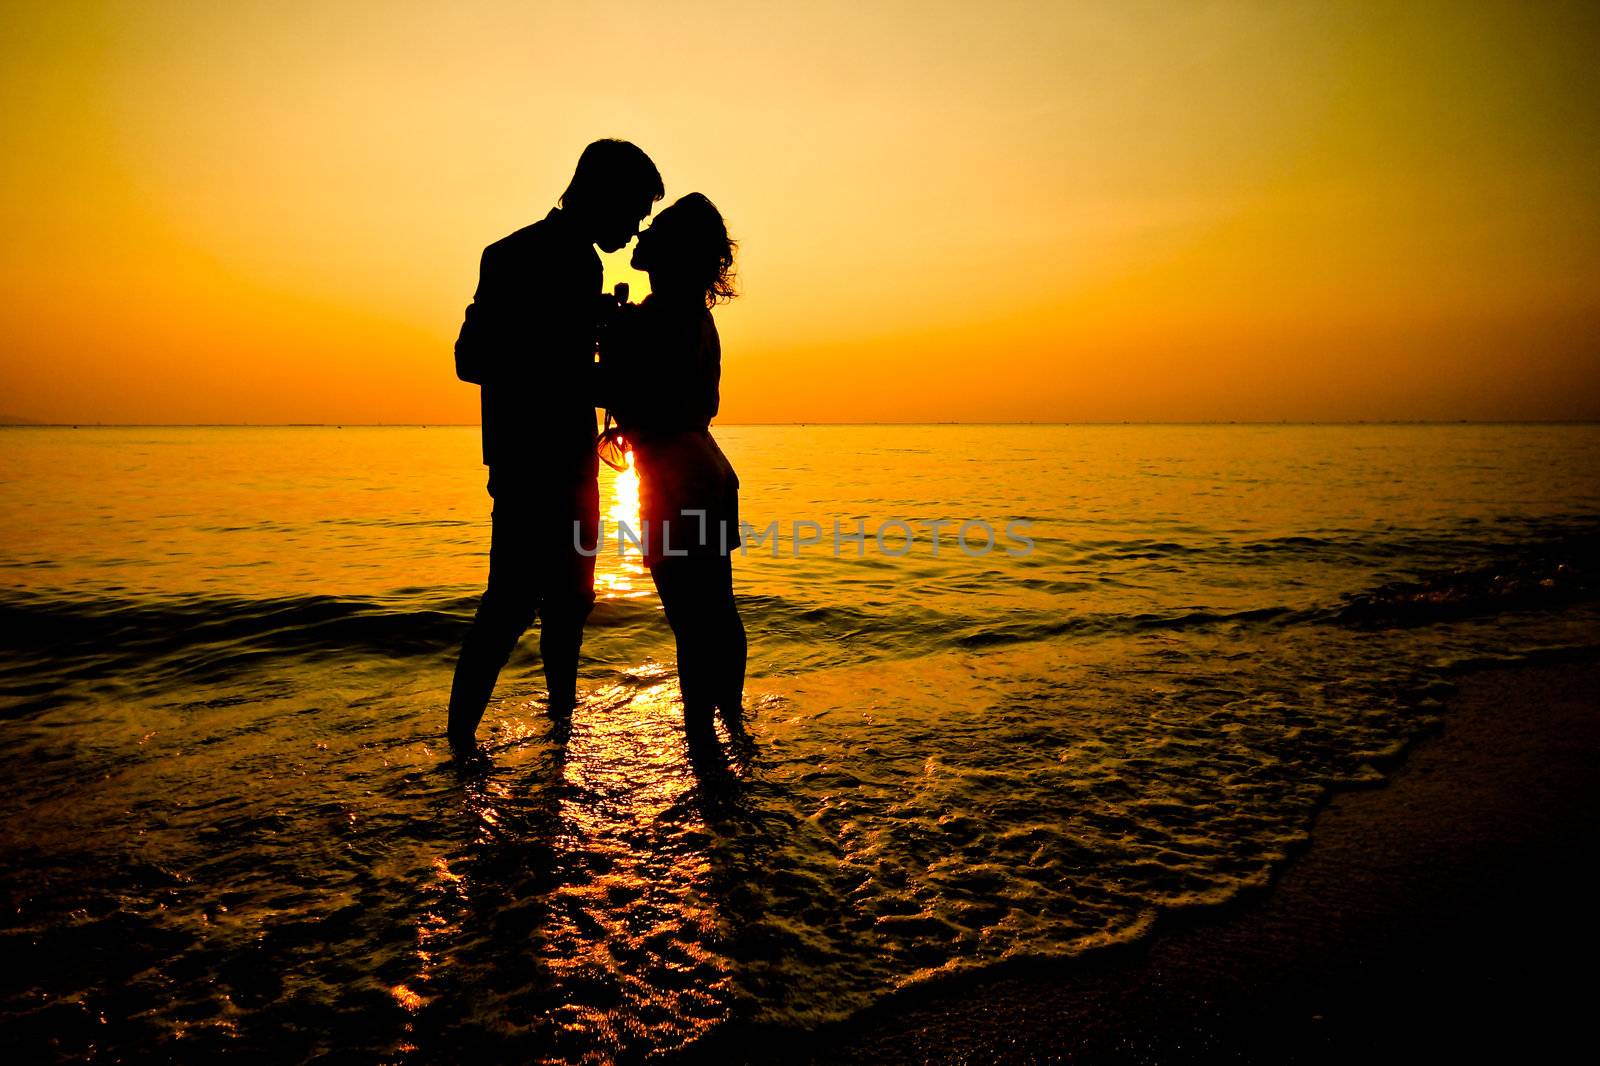 Silhouette of a young romantic couple  on sunset by phalakon